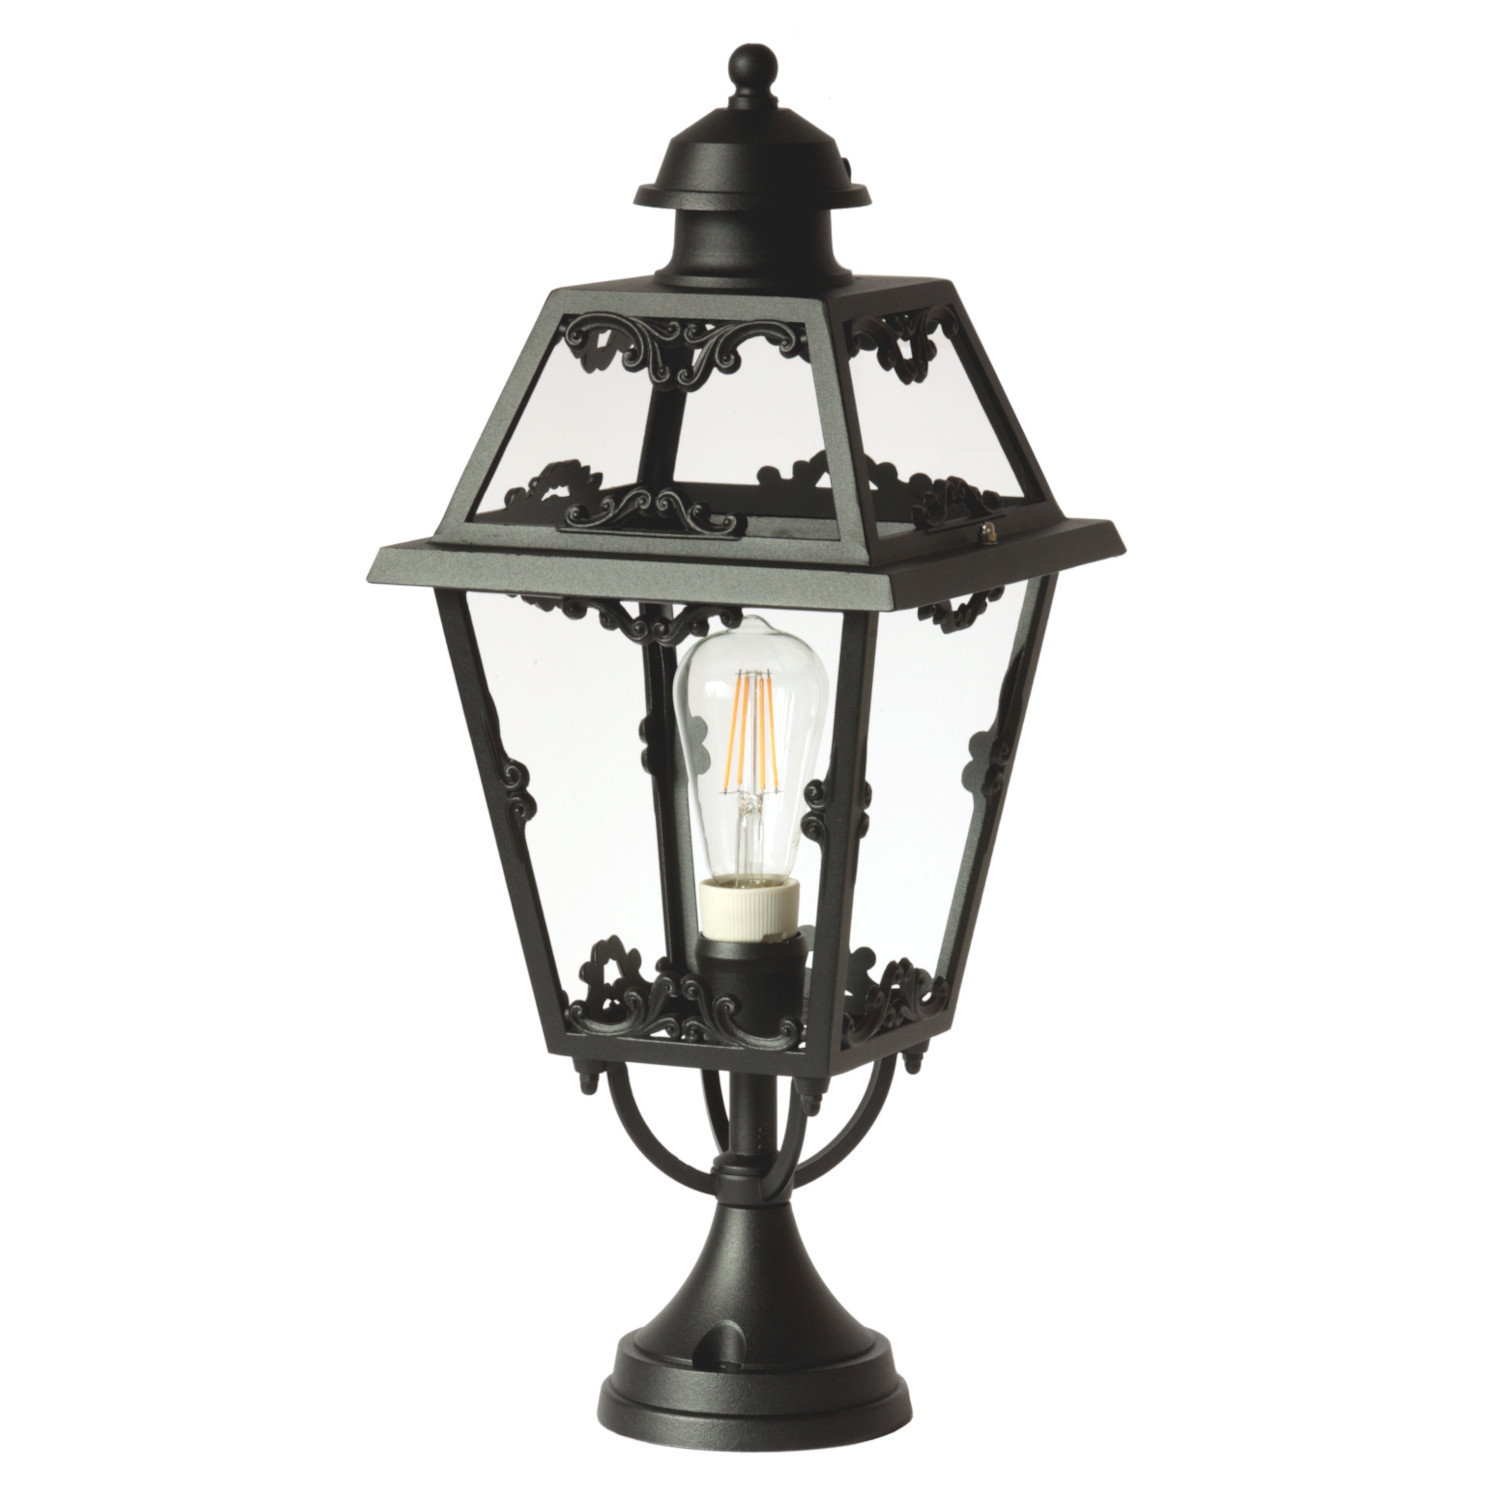 Historical garden lamp with glass roof and ornaments